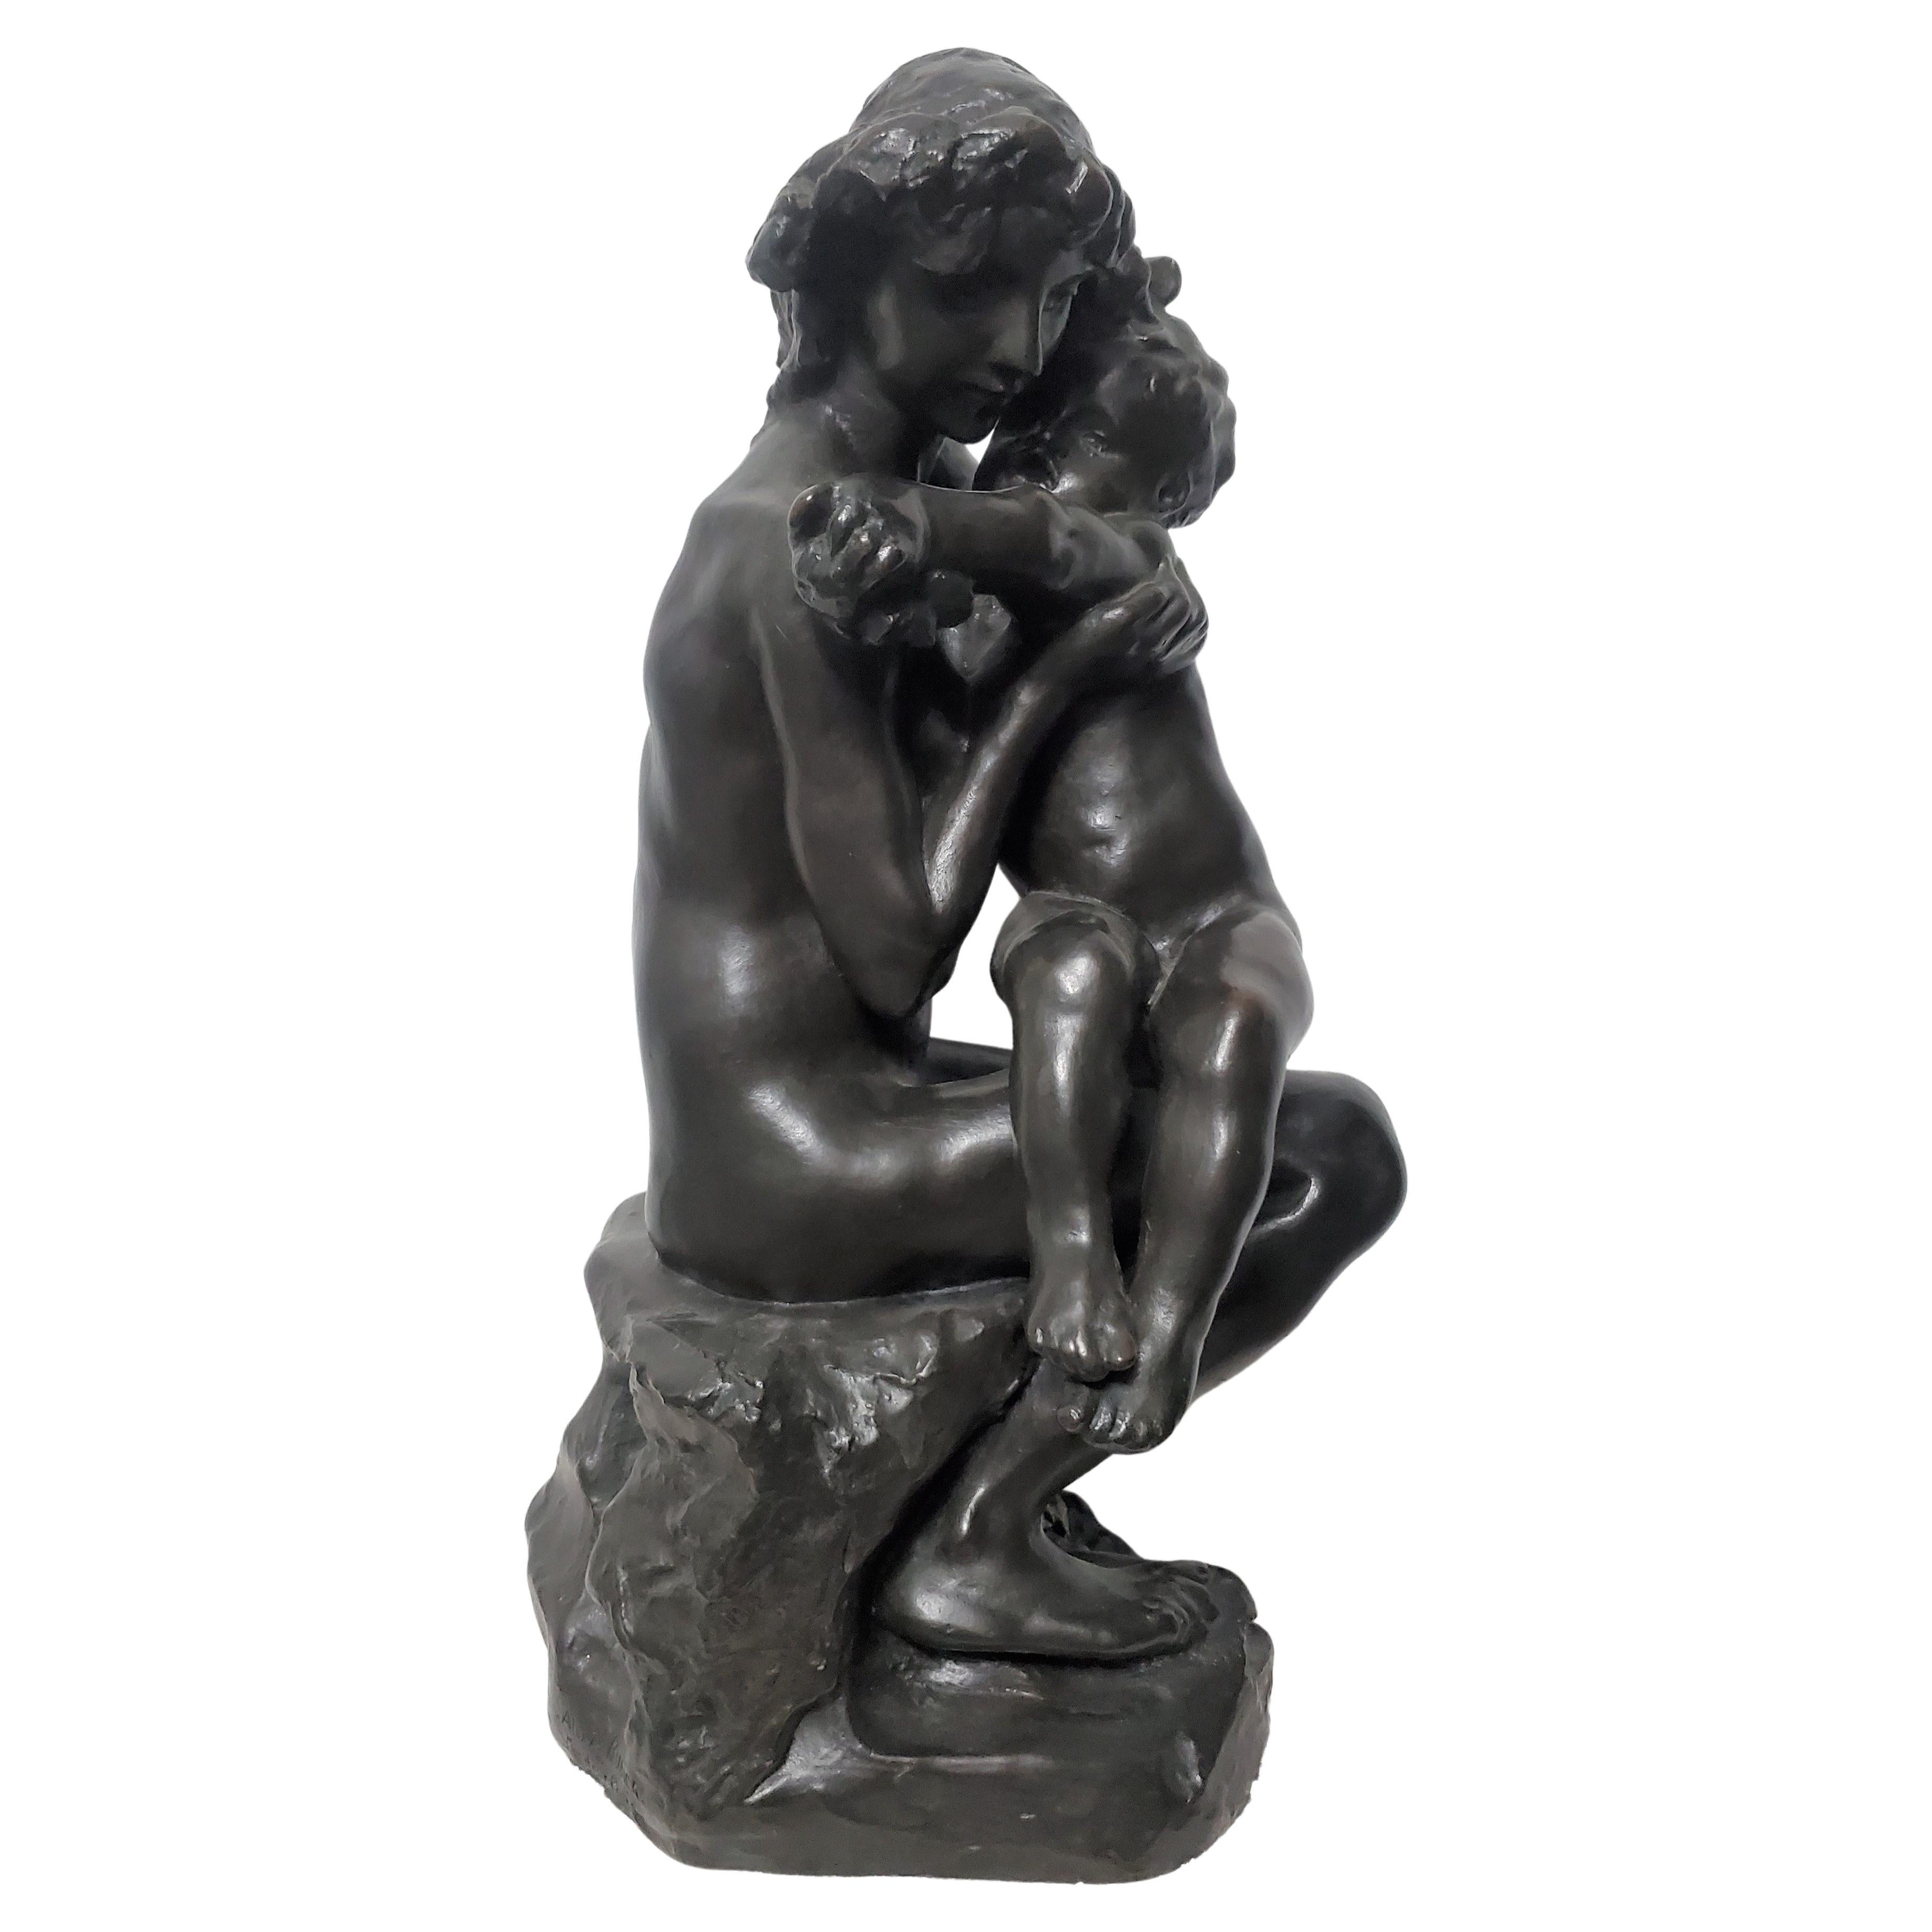 
An important original bronze sculpture of Brother and Sister- Frère et Soeur ,
by A. Rodin (1840-1917)
signed 'A. Rodin' on the right of the base, inscribed with the foundry mark 'Alexis Rudier, Fondeur, Paris on the left back of the base along